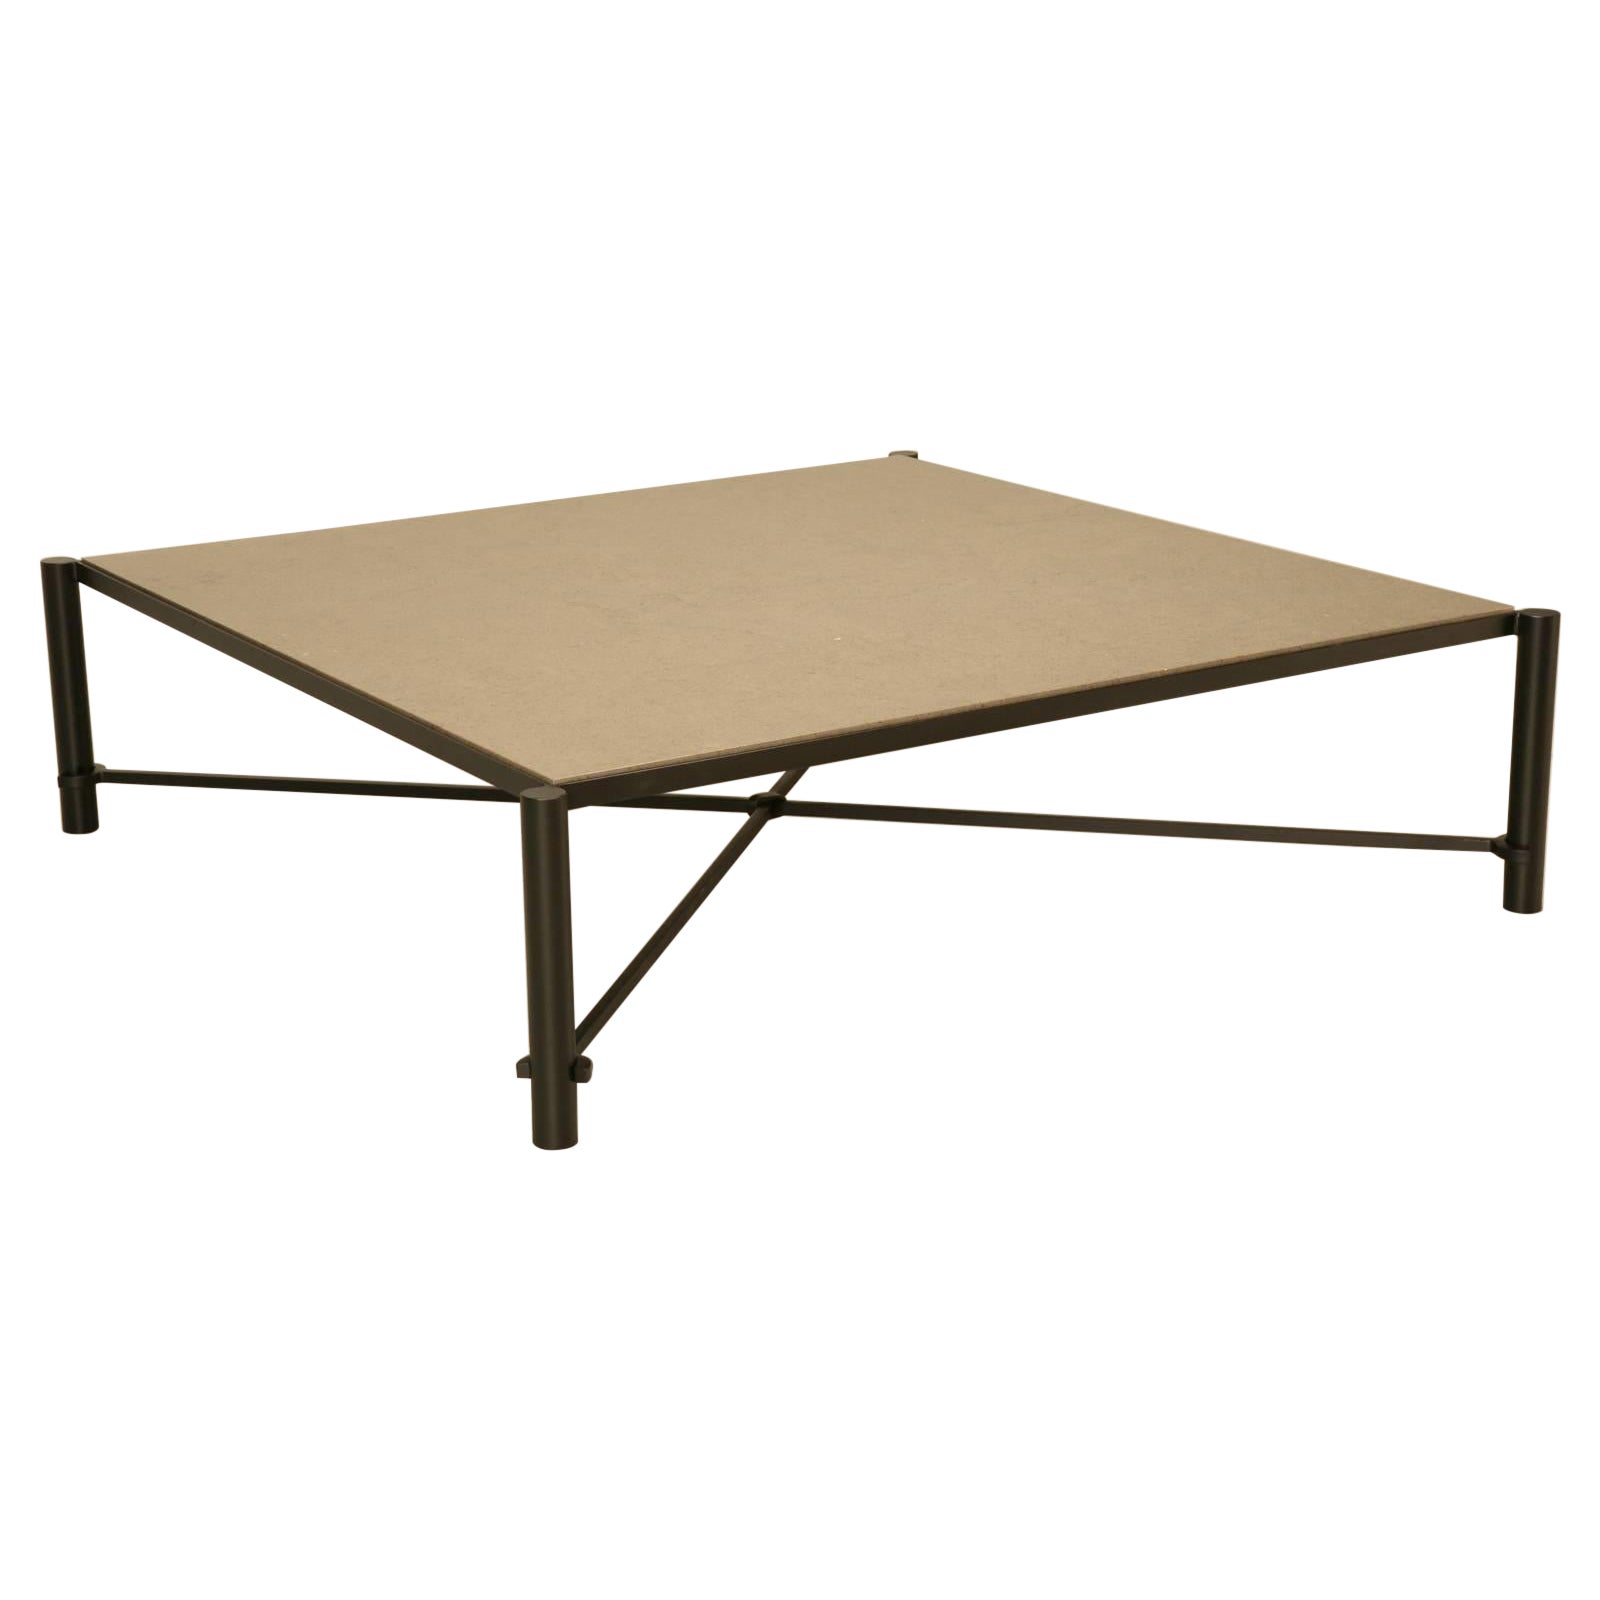 Mid-Century Modern Steel & Stone Coffee Table Custom Built to Order in Chicago  For Sale